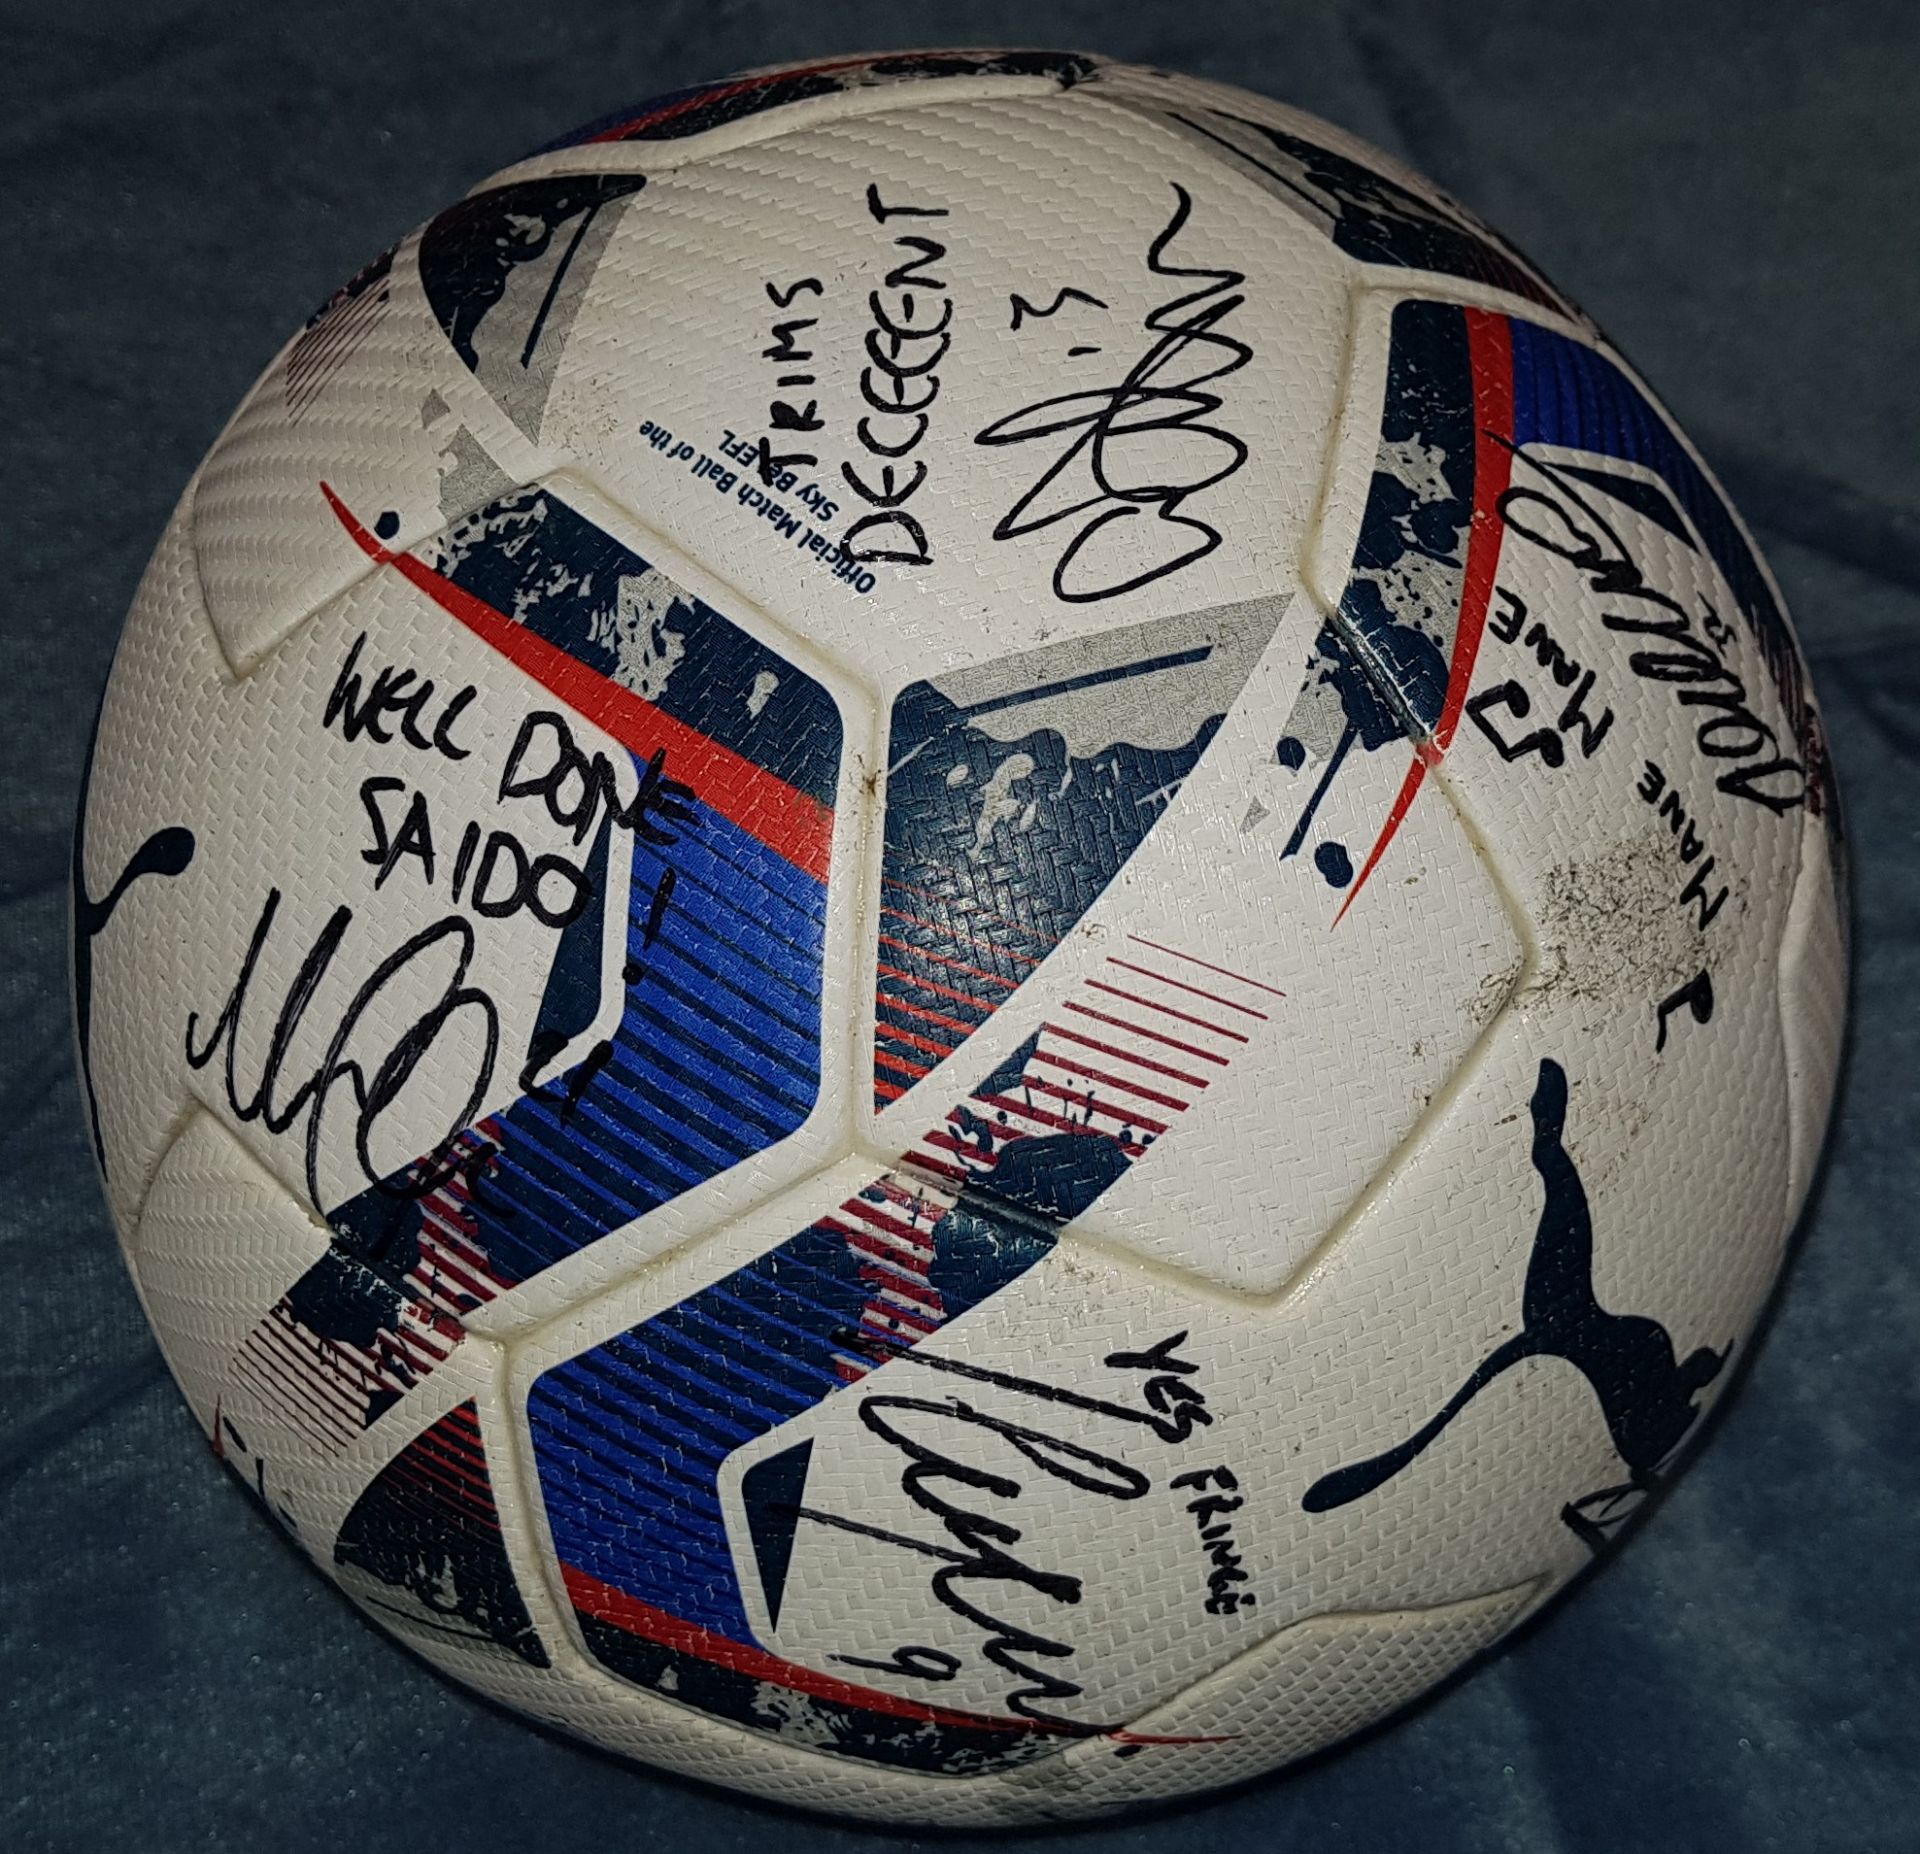 PUMA SIZE 5 FOOTBALL FIFA QUALITY PRO SKYBET EFL WITH NUMEROUS UNKNOWN SIGNATURES (SEE IMAGES) - Image 4 of 4